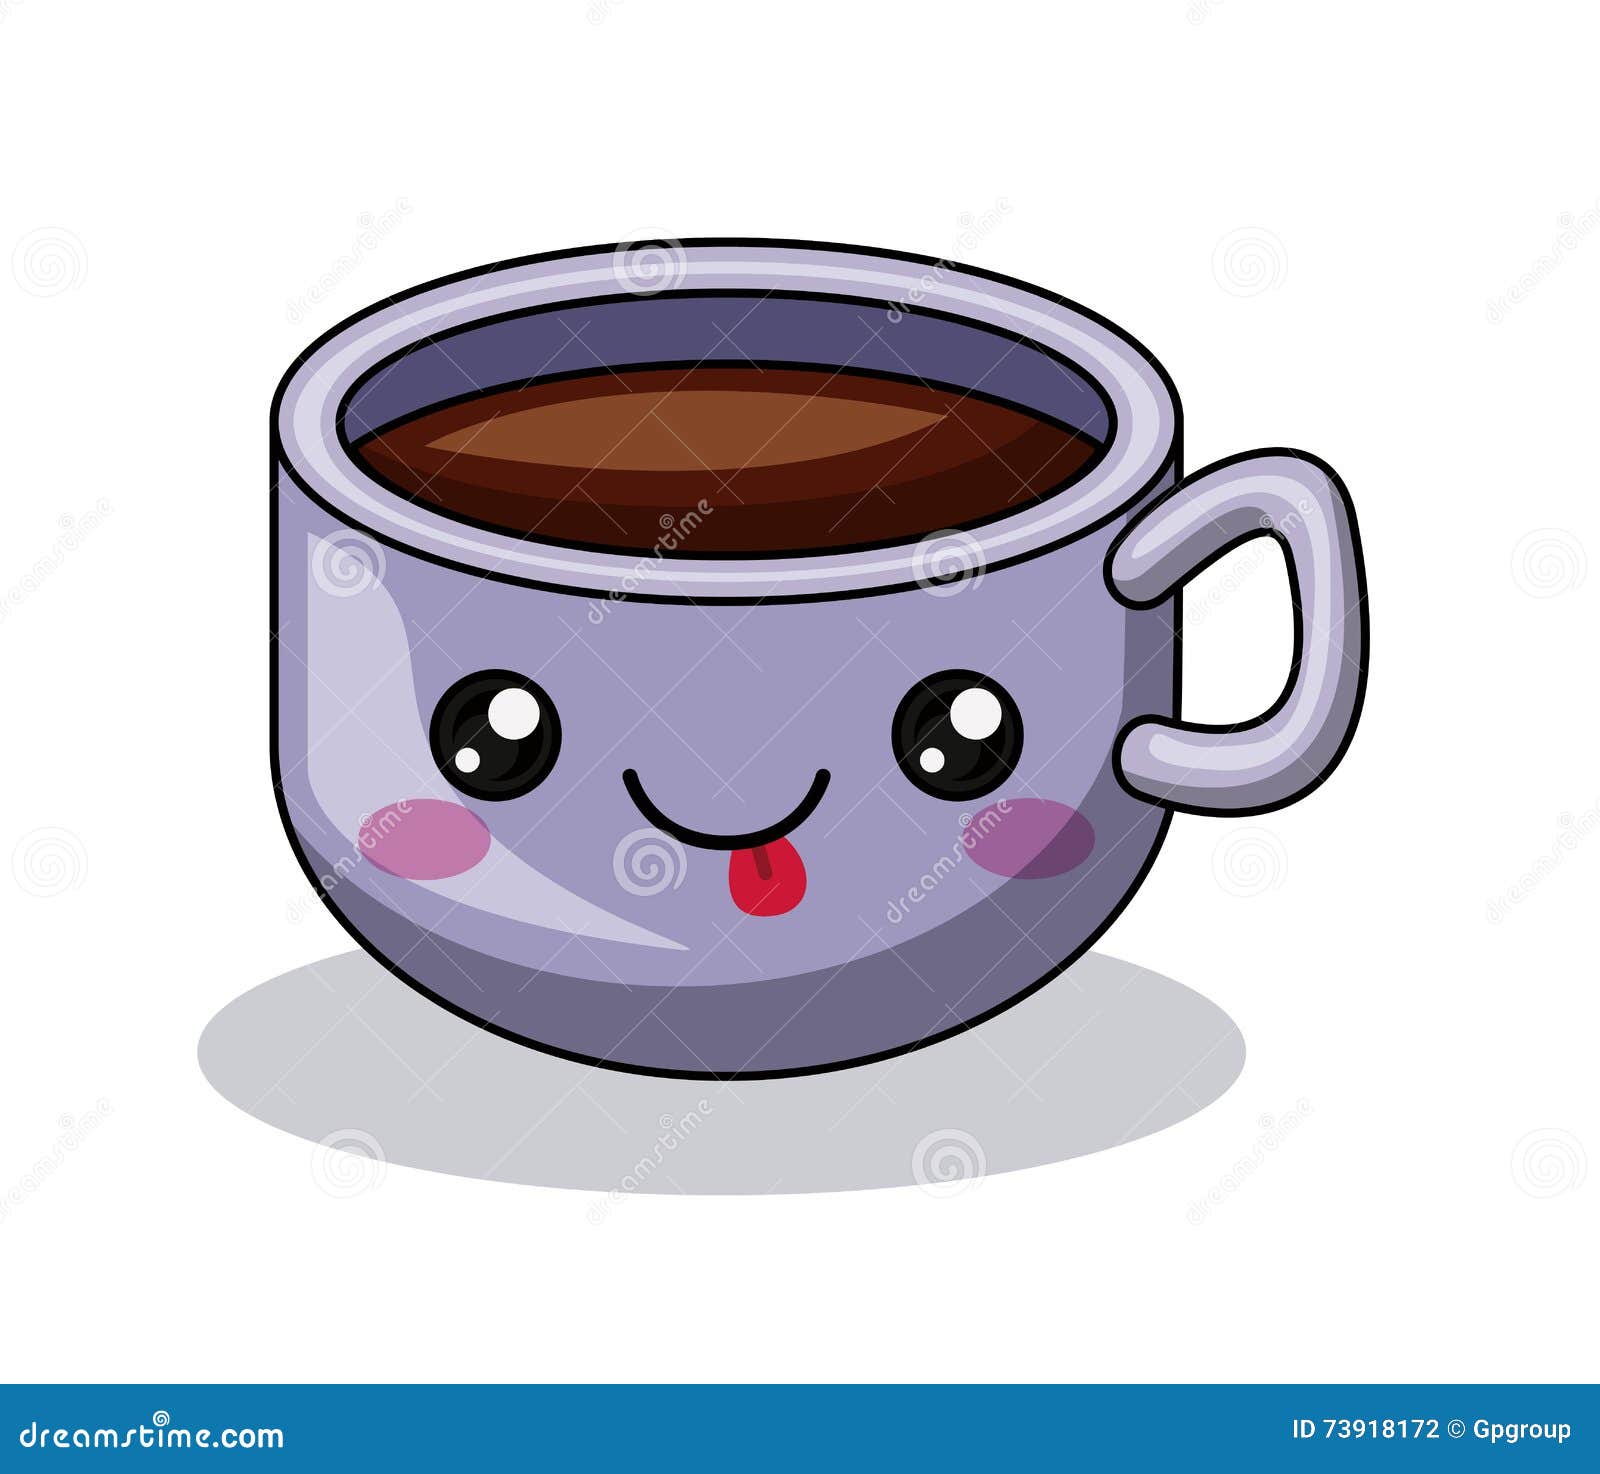 Coffee cup cute kawaii smiling and friendly Vector Image